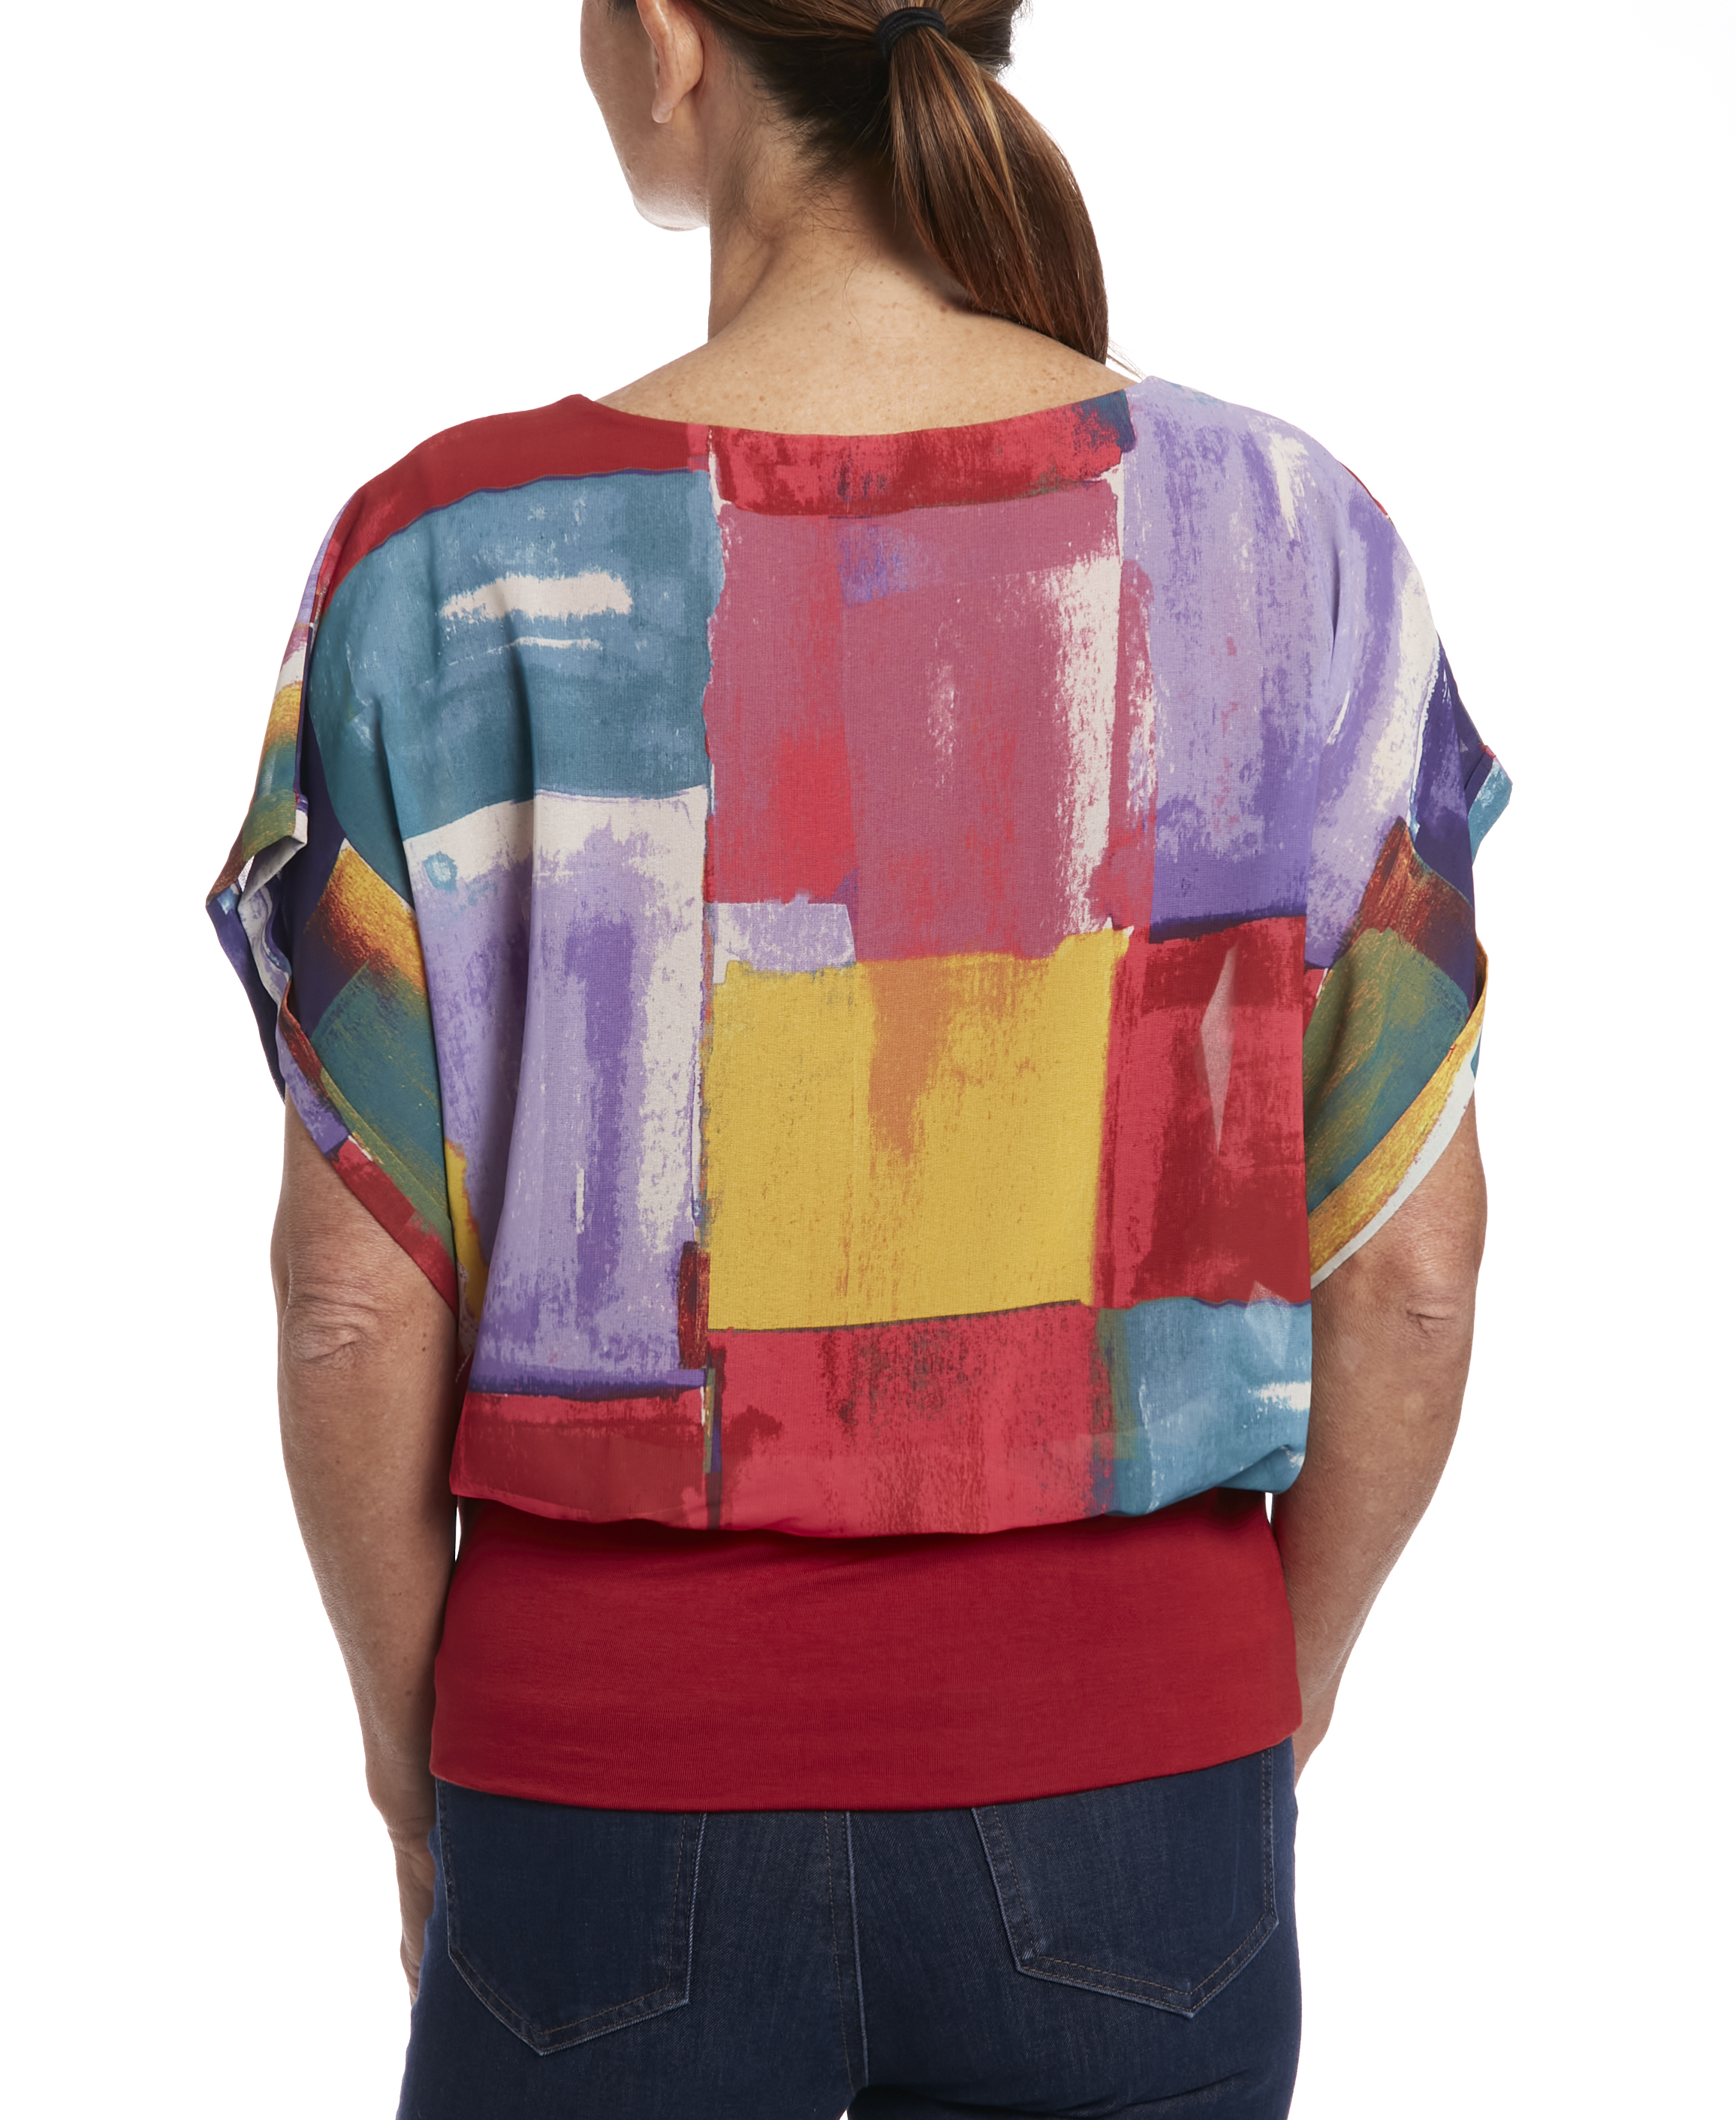 Dolman Sleeve Chiffon Top in Painterly Patchwork